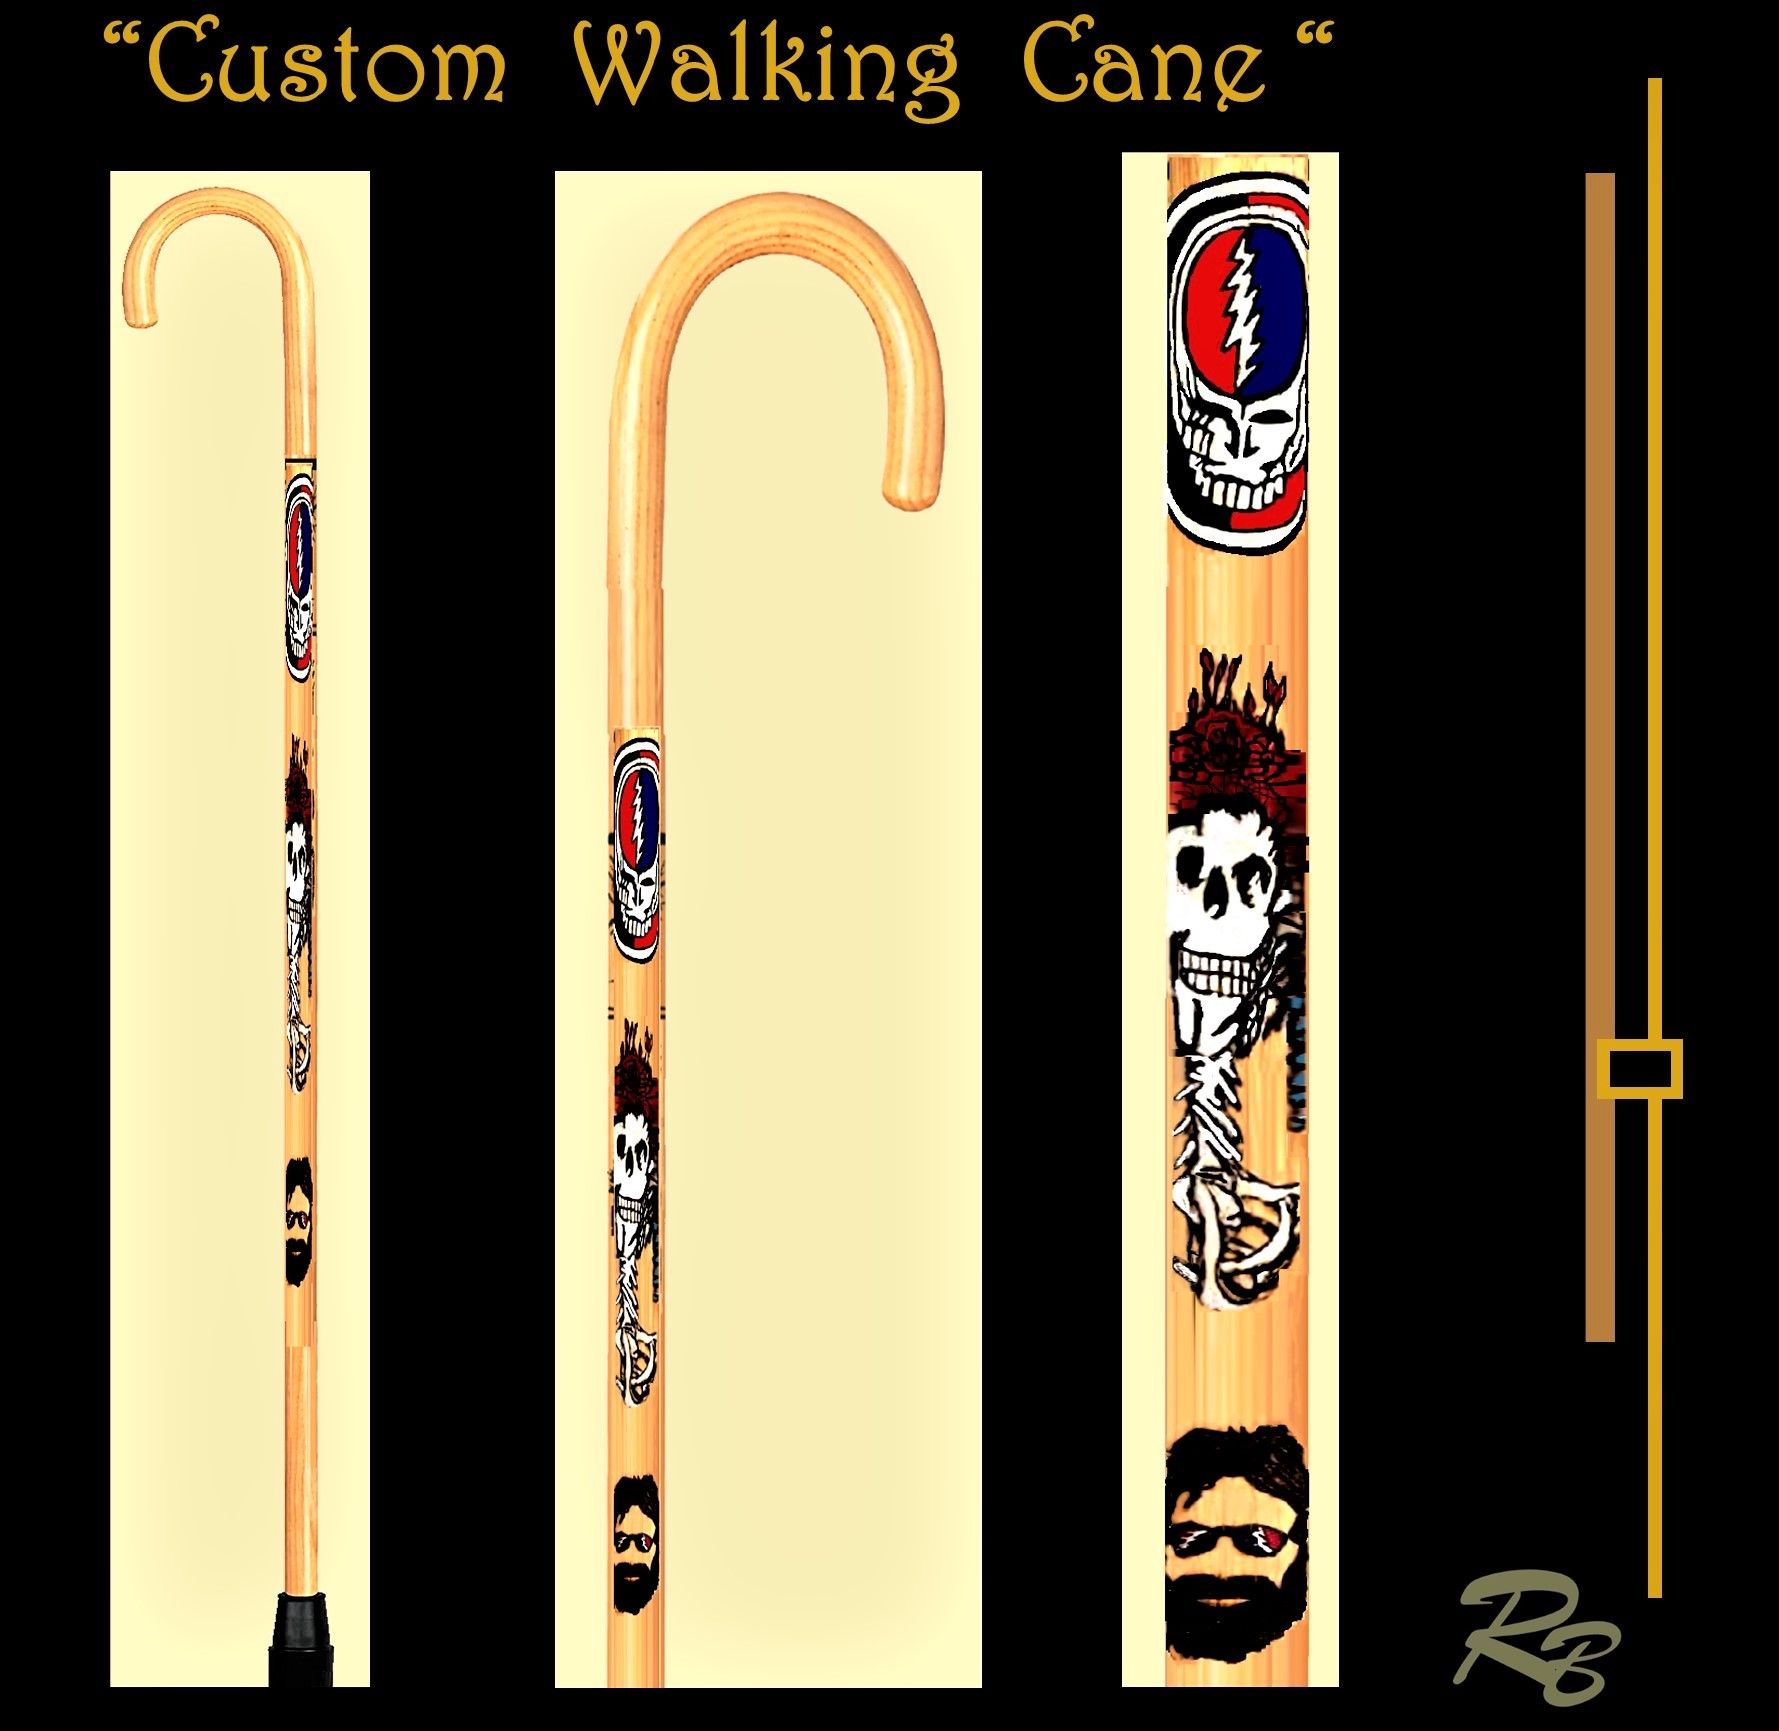 Hand Made Wood, Cane, Custom Cane, Painted Cane, Retirement Gift